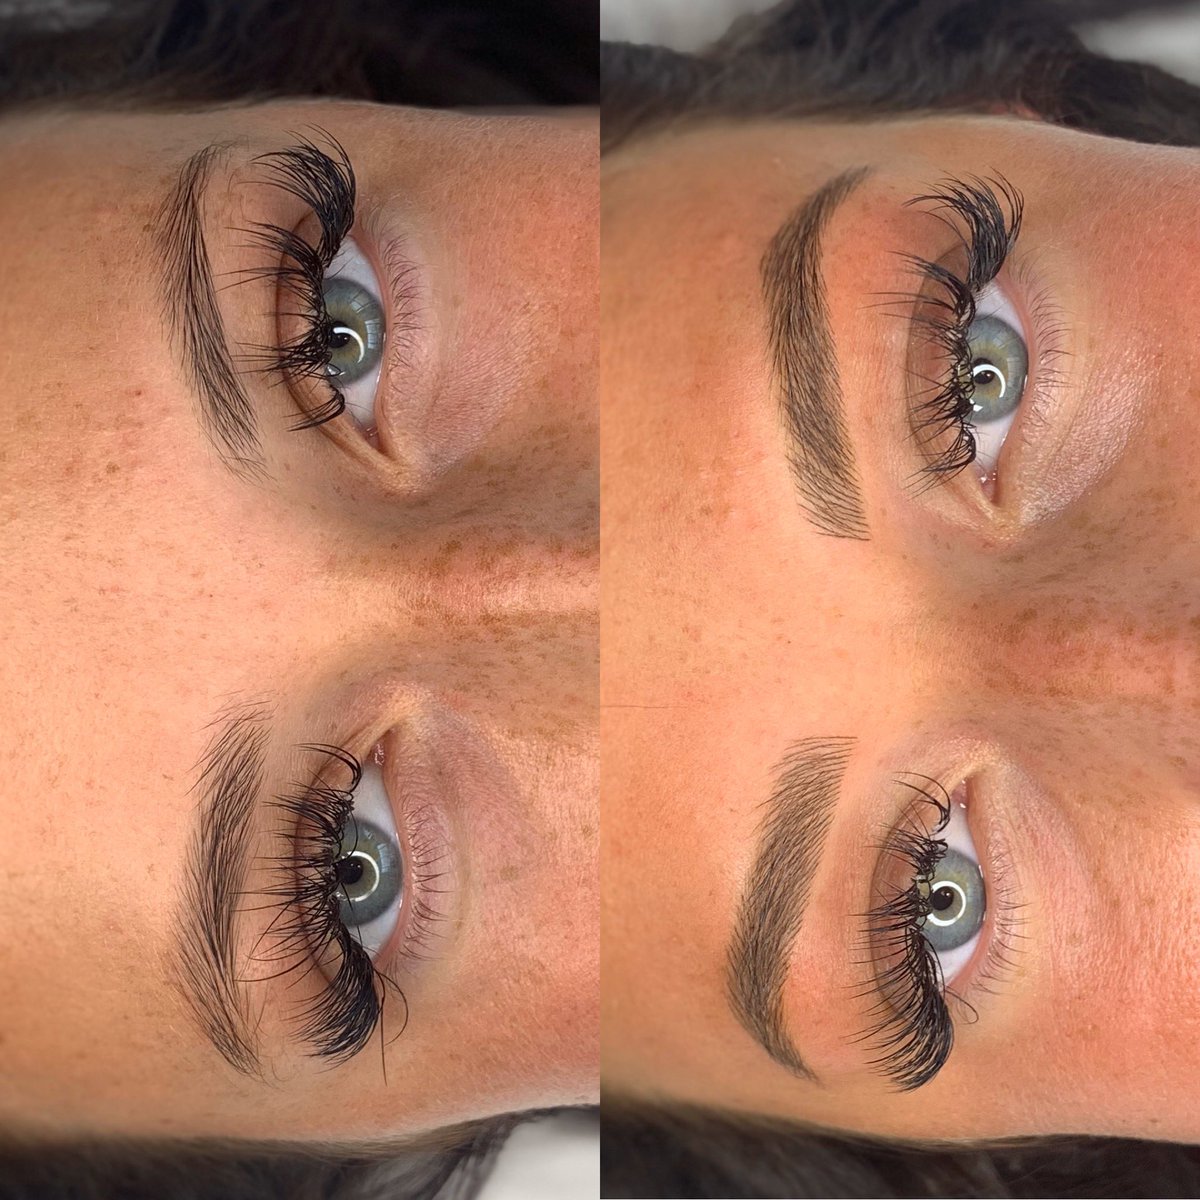 Brow obsession continues #brows#browshape#nomakeup#spmu#shropshire#fluffybrows#newport#browgoals